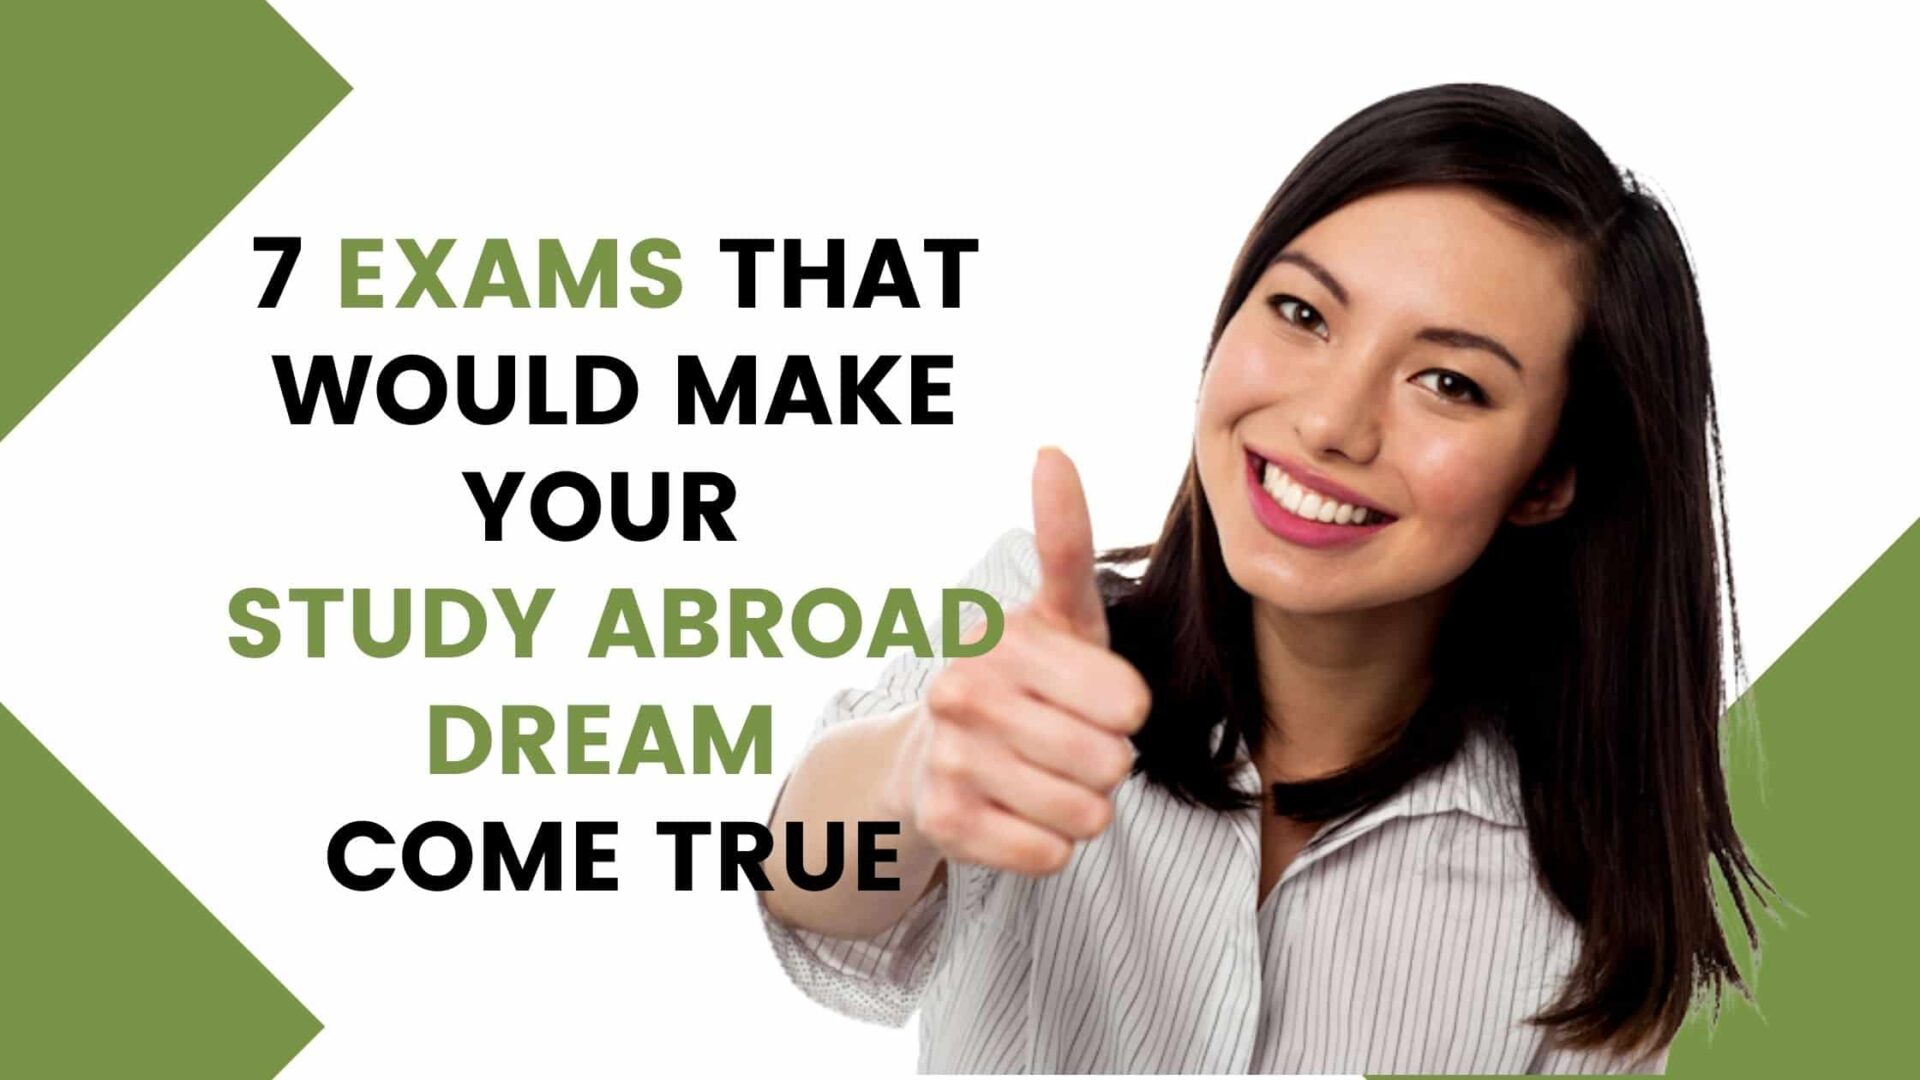 Top 7 most important exams to study abroad